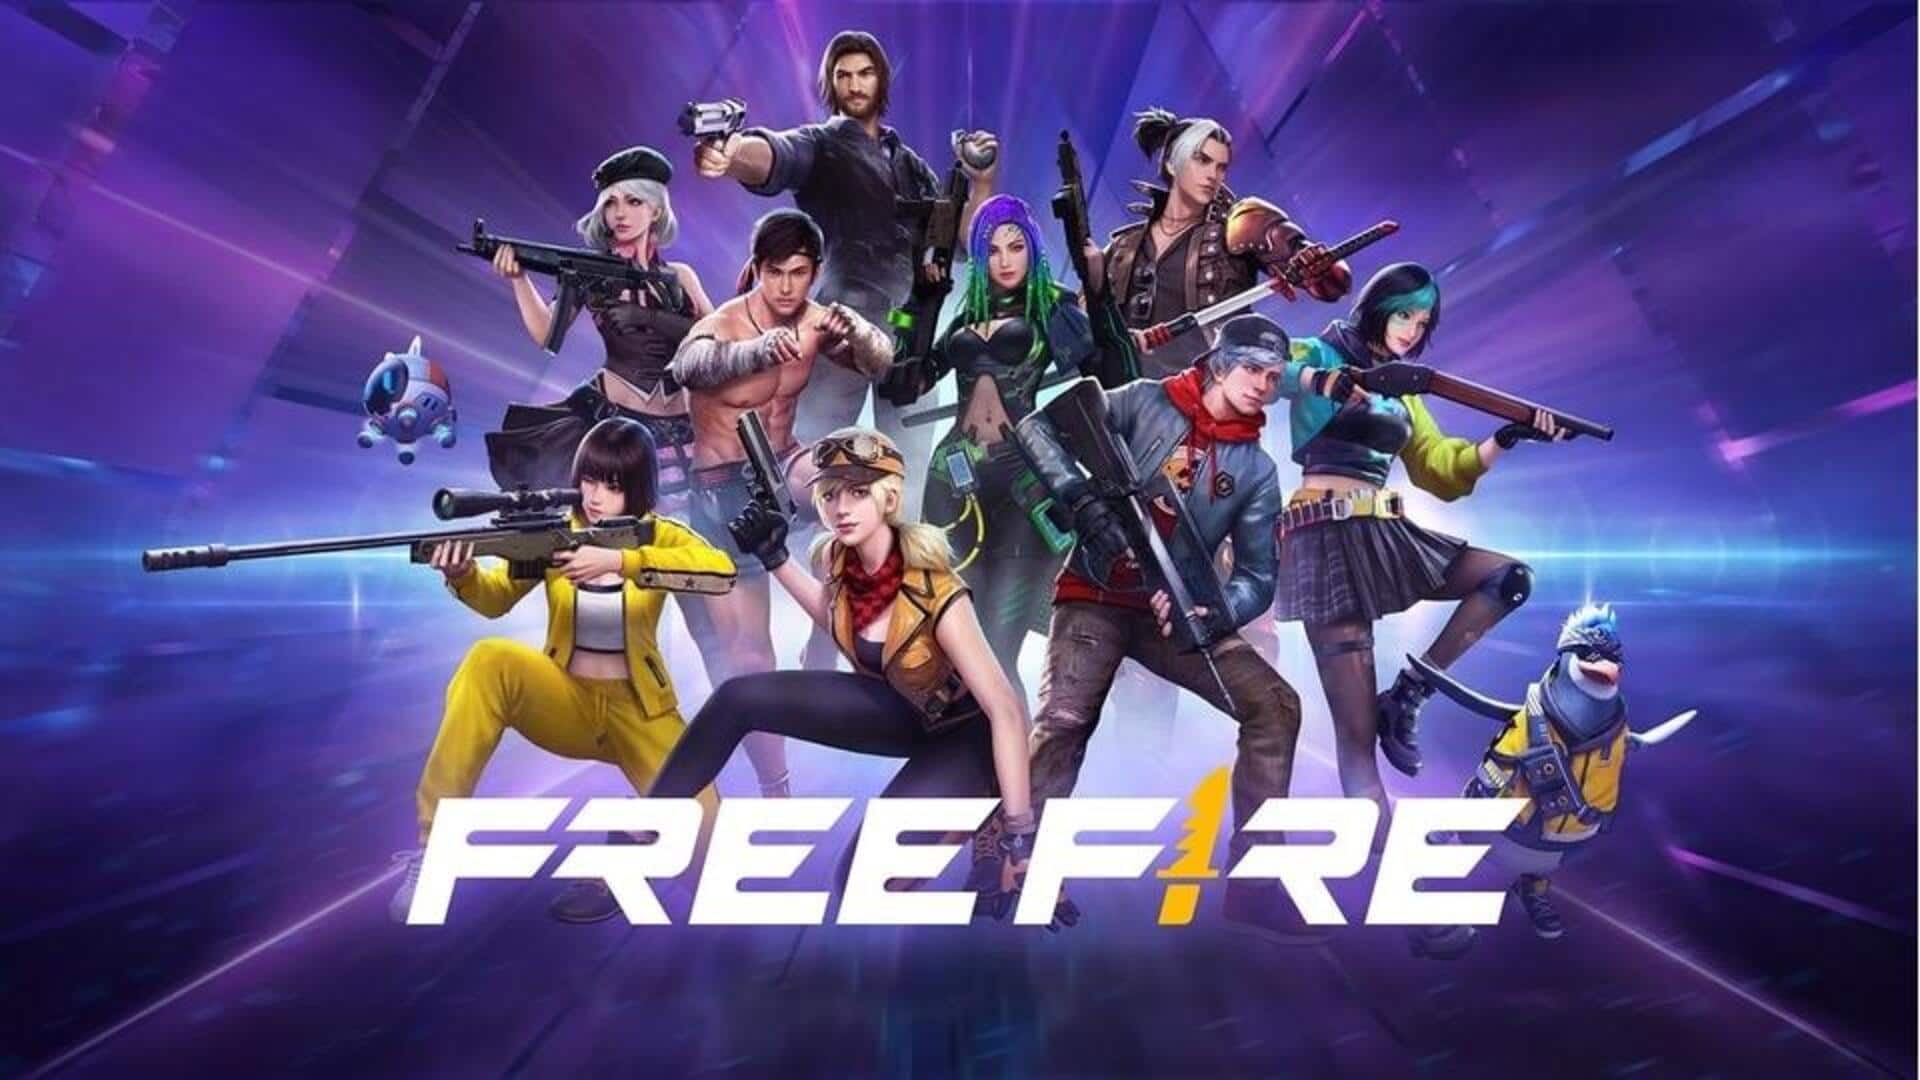 Garena Free Fire returns to India gaming arena with MS Dhoni as